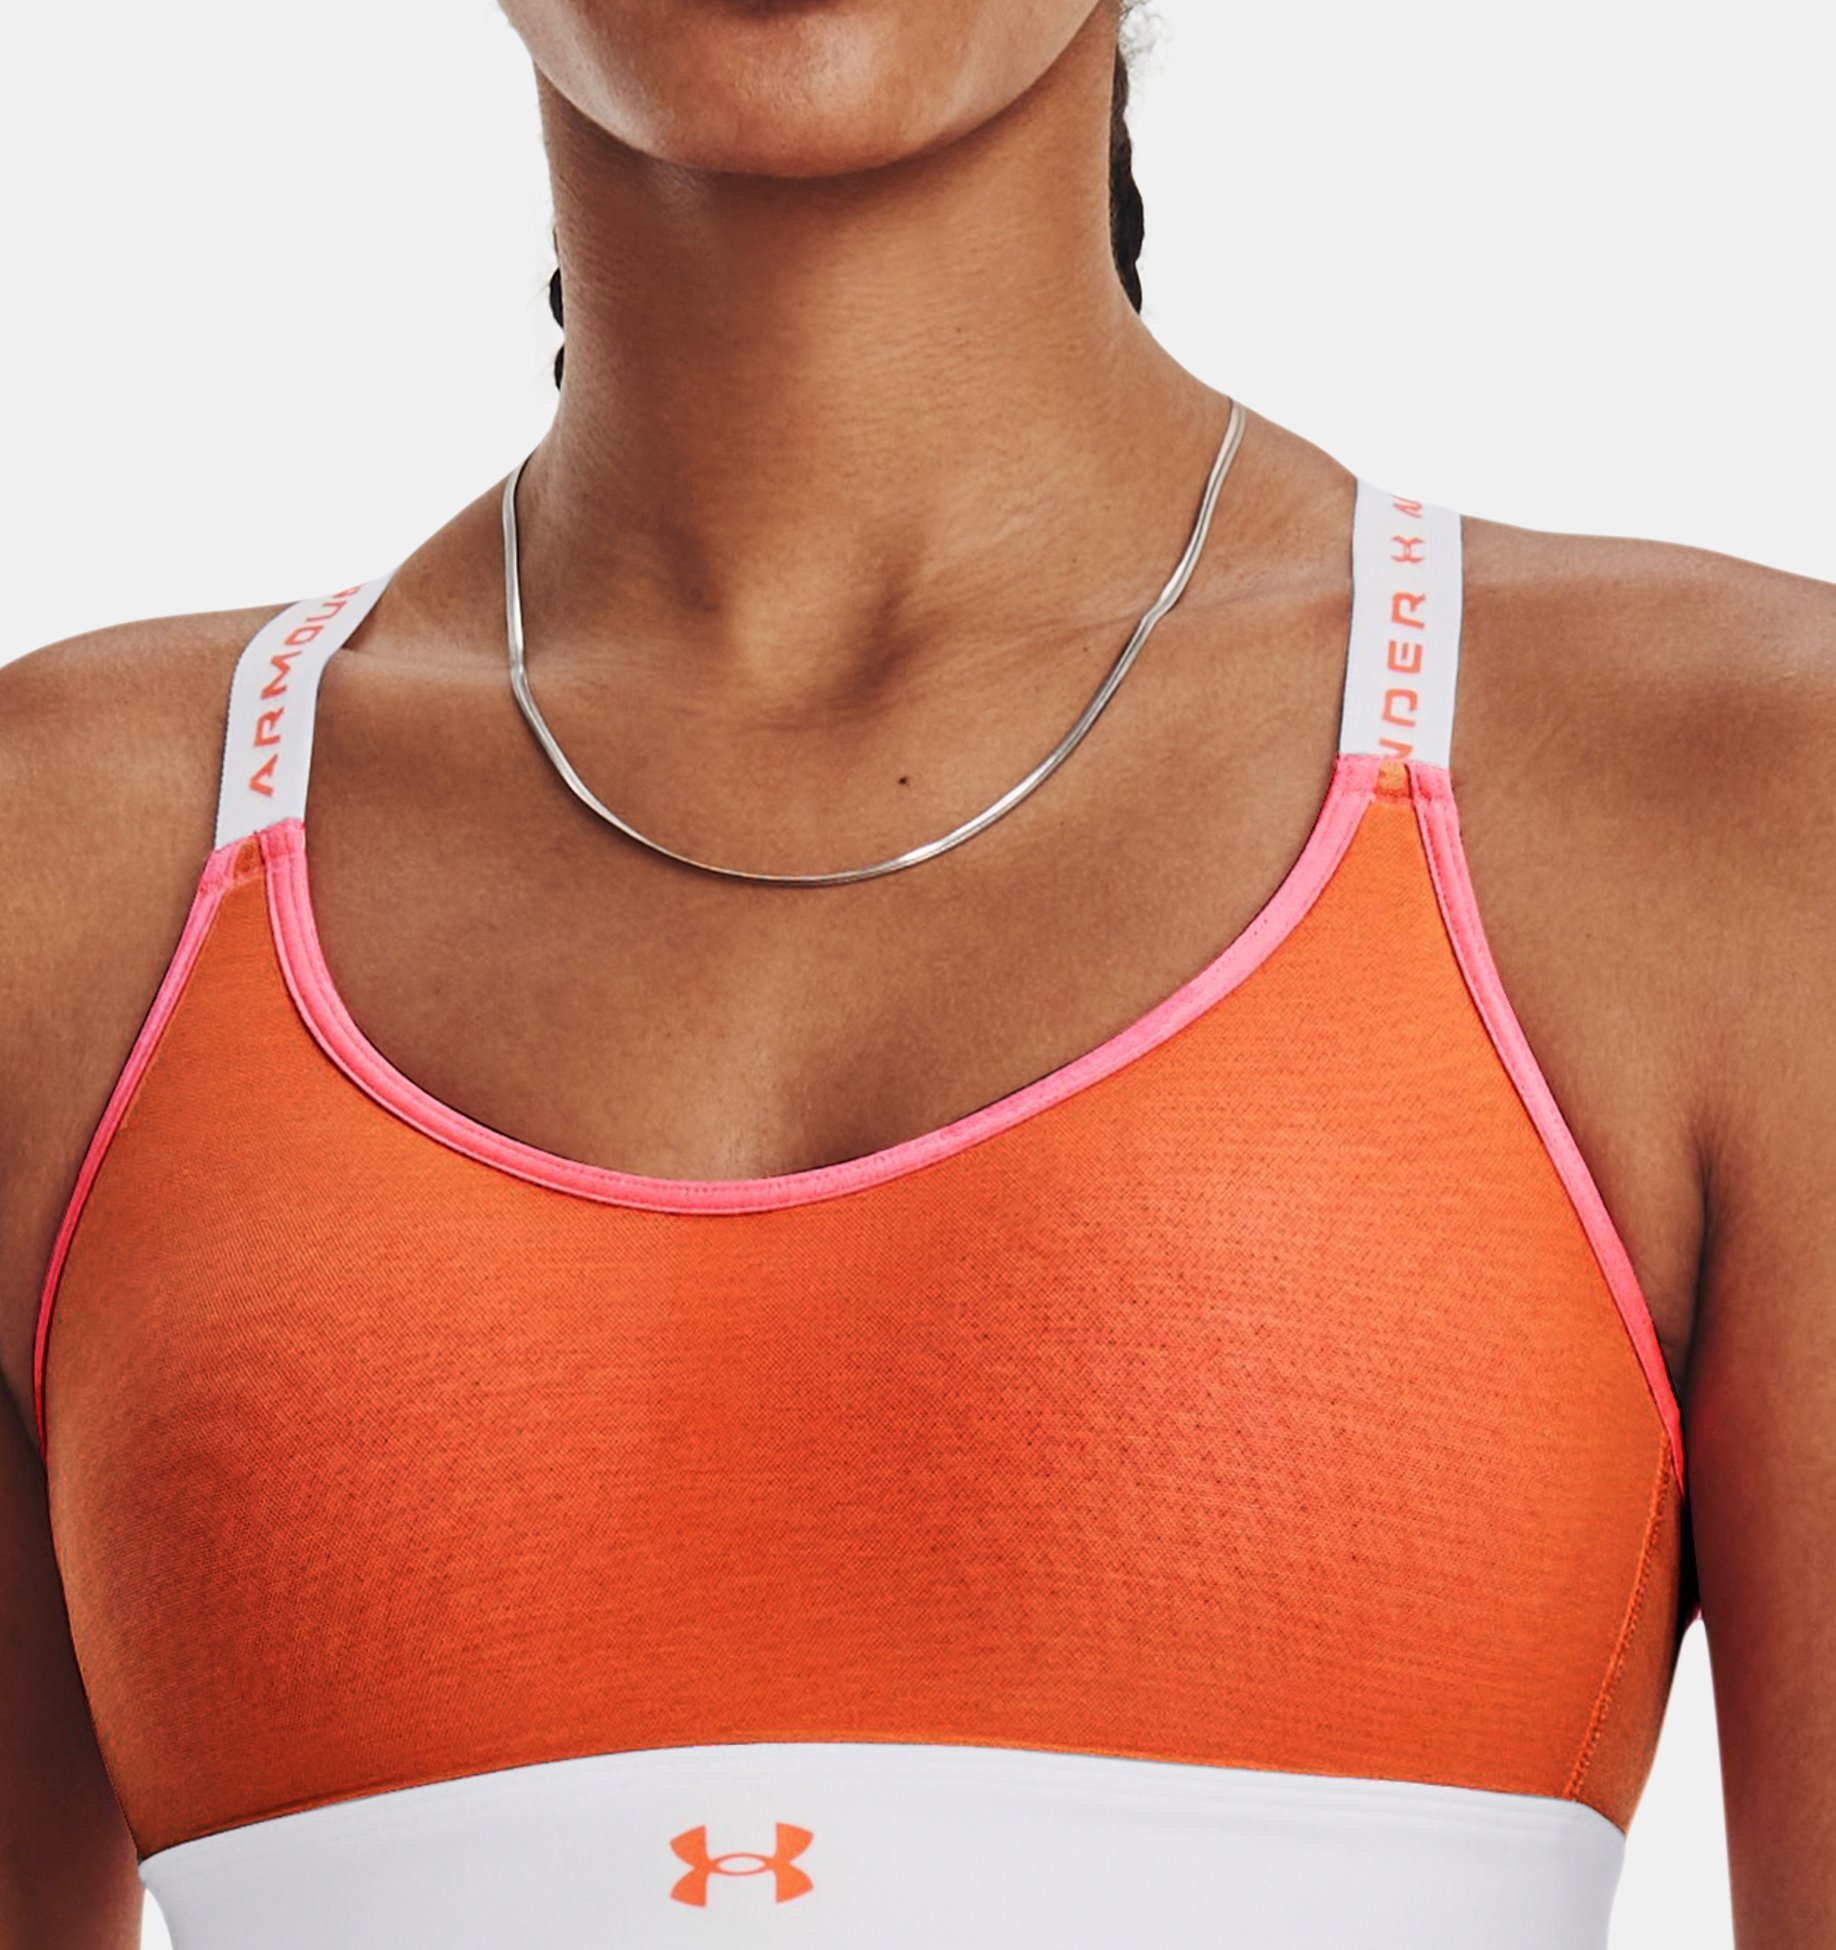 Fit2Run, San Juan - Mall of San Juan - Let's talk about running bras, not  sports bras but bras specifically for running. Brooks has taken the sports  bra game to a whole